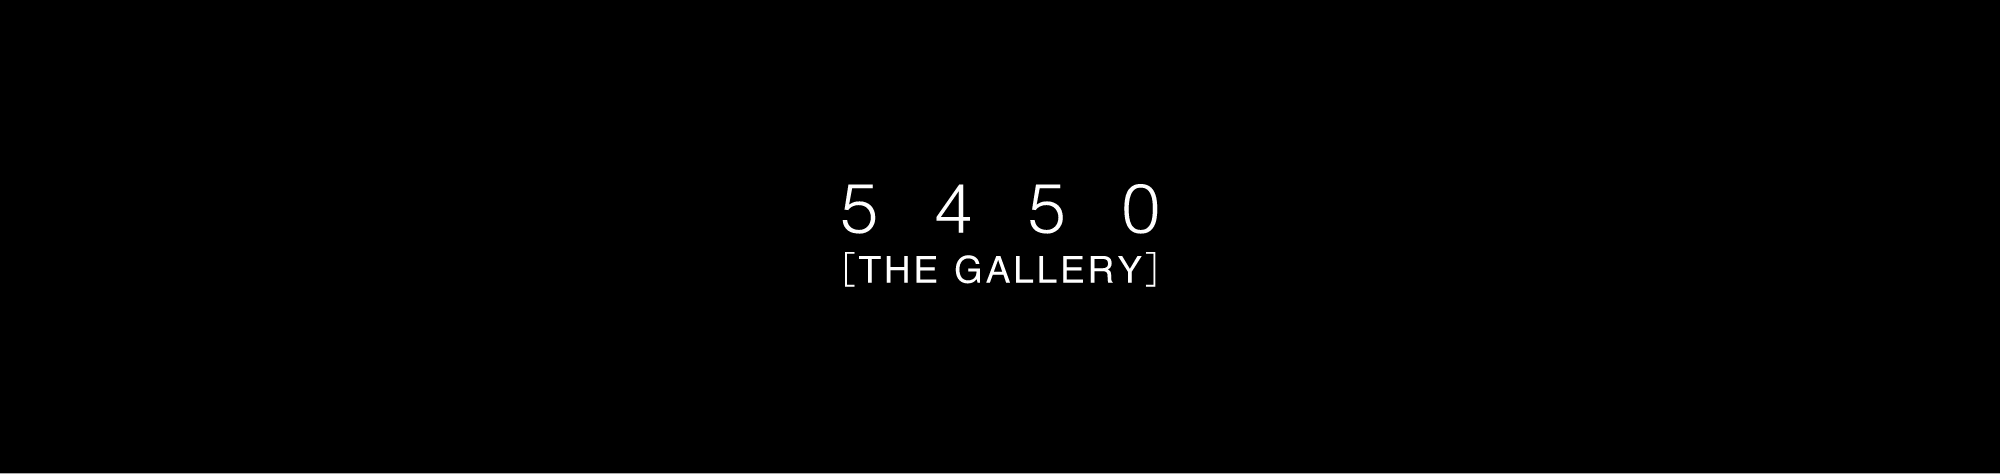 5450 THE GALLERY